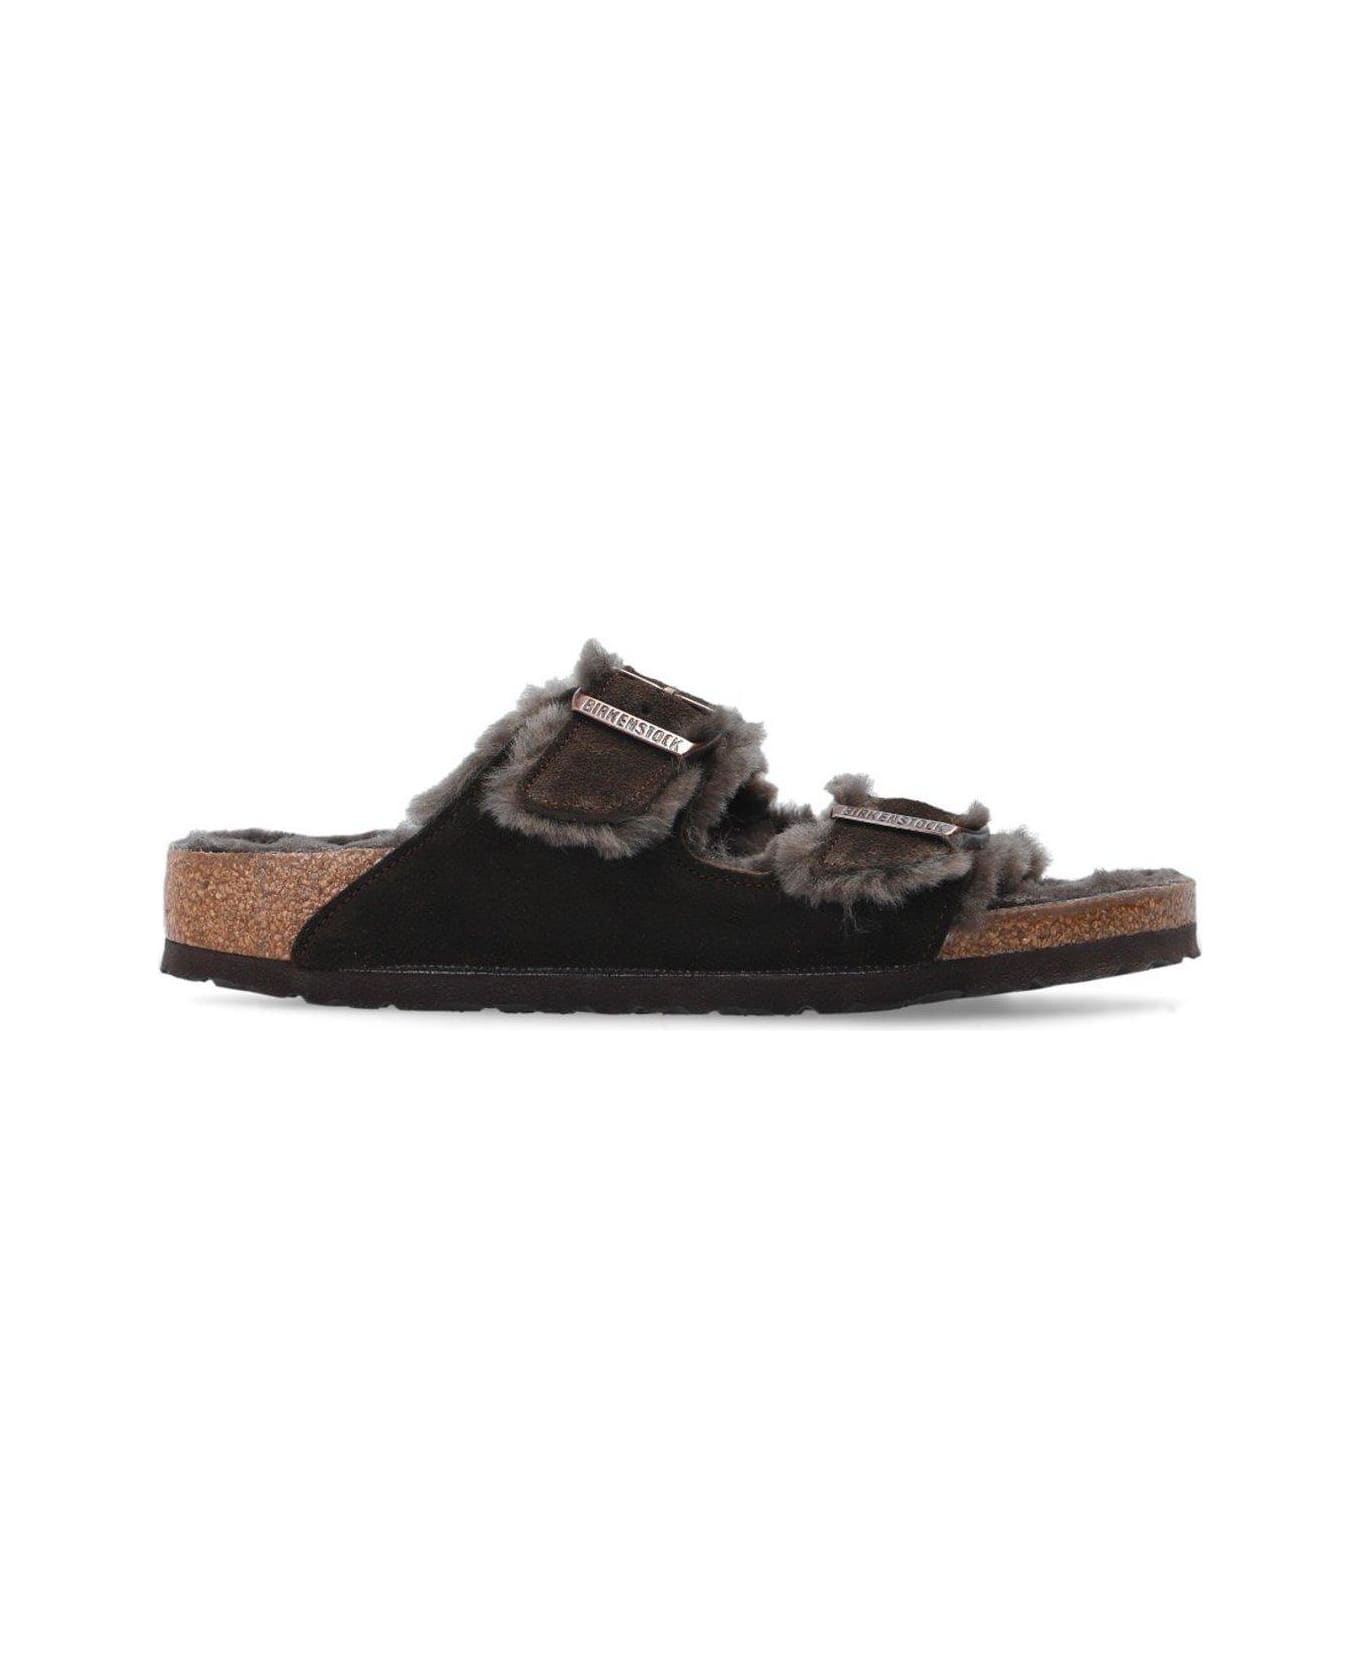 Birkenstock Arizona Double Strap Shearling Sandals - Mocca その他各種シューズ